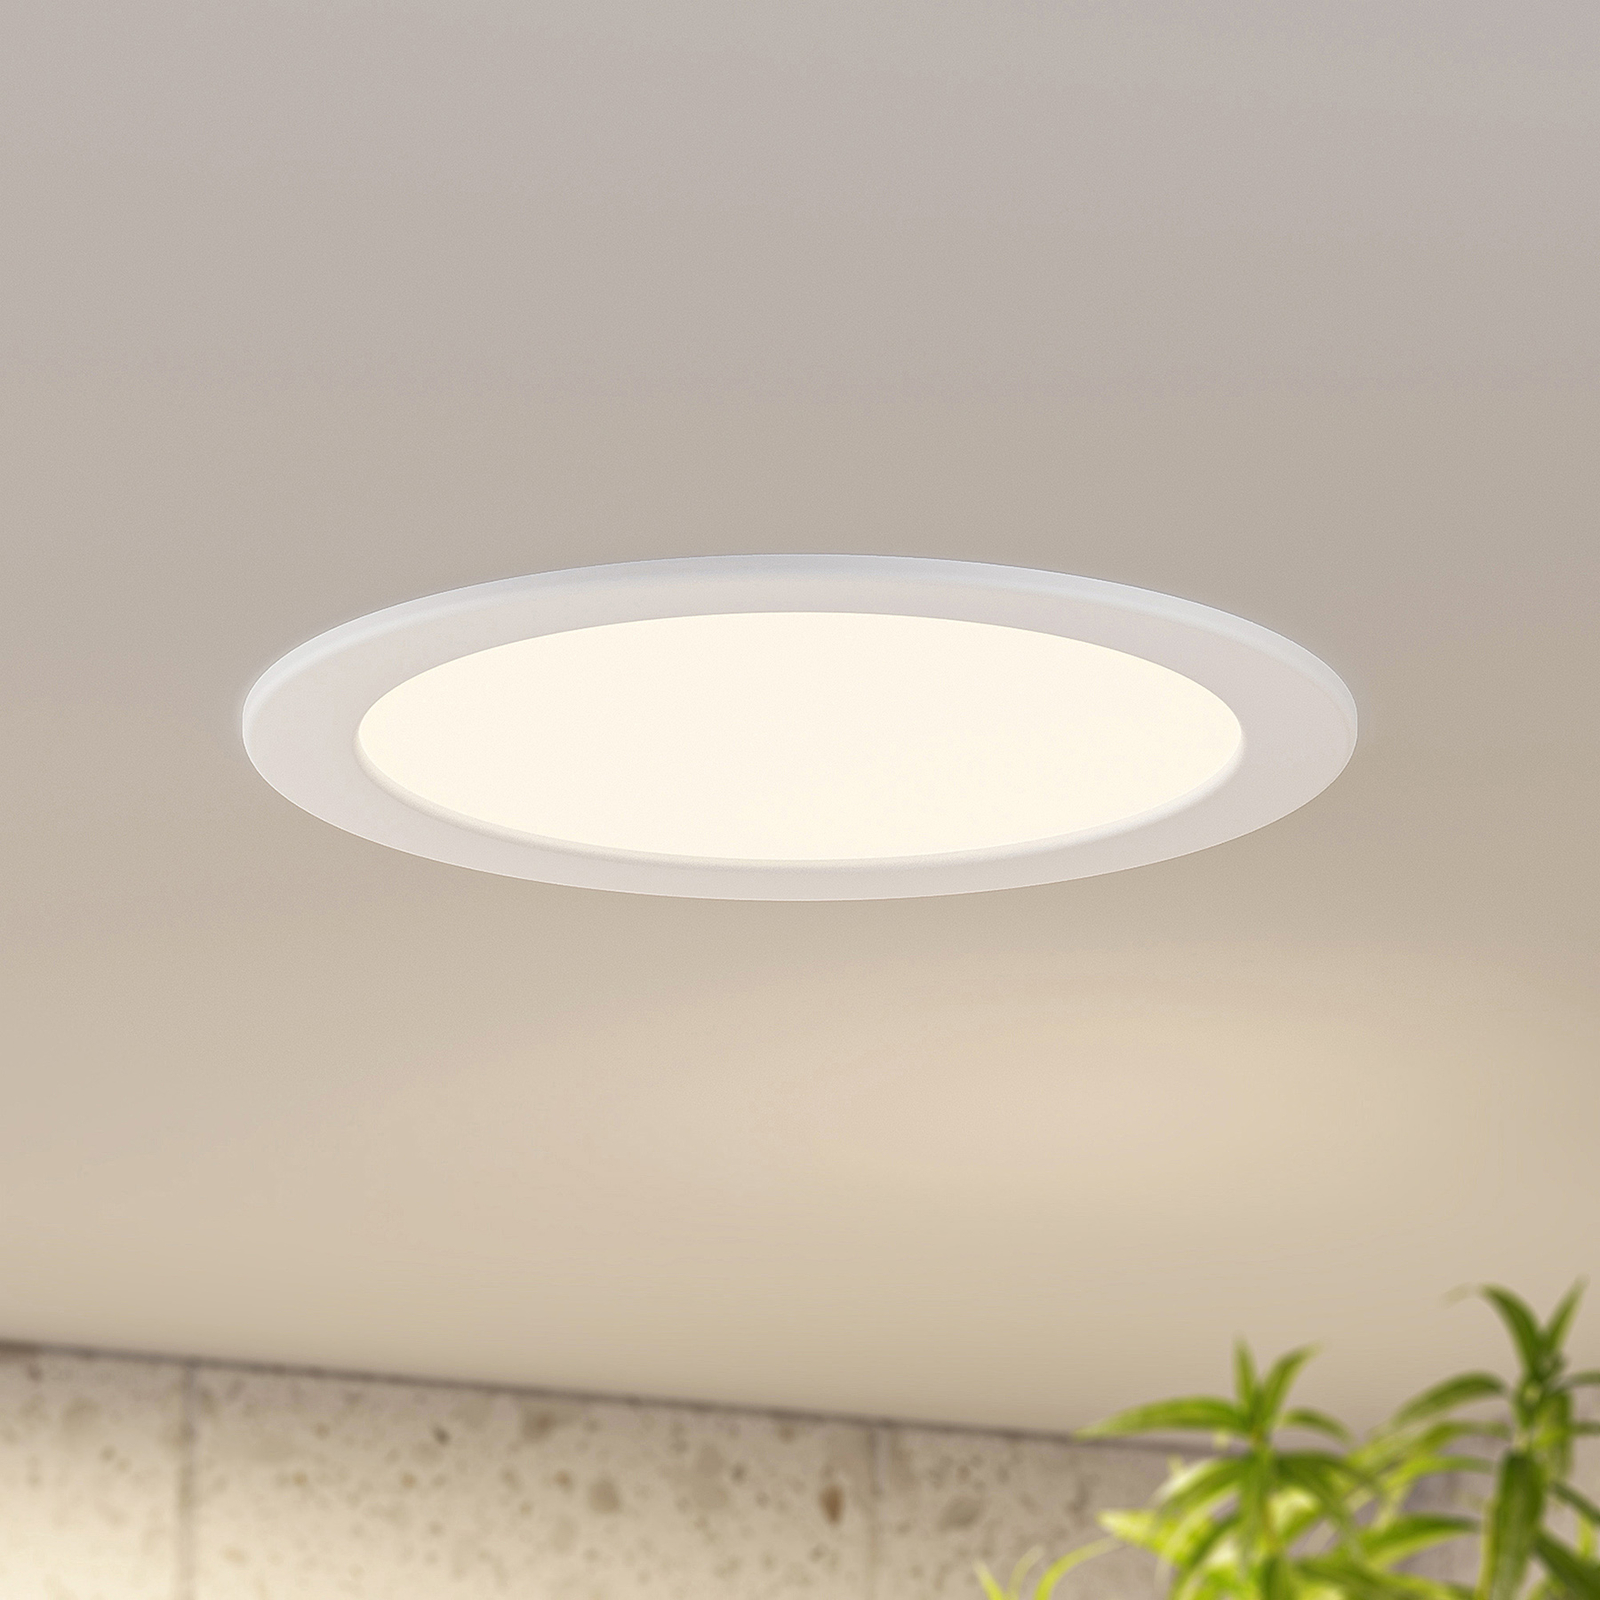 Prios LED recessed light Cadance, white, 24 cm, set of 3, dimmable